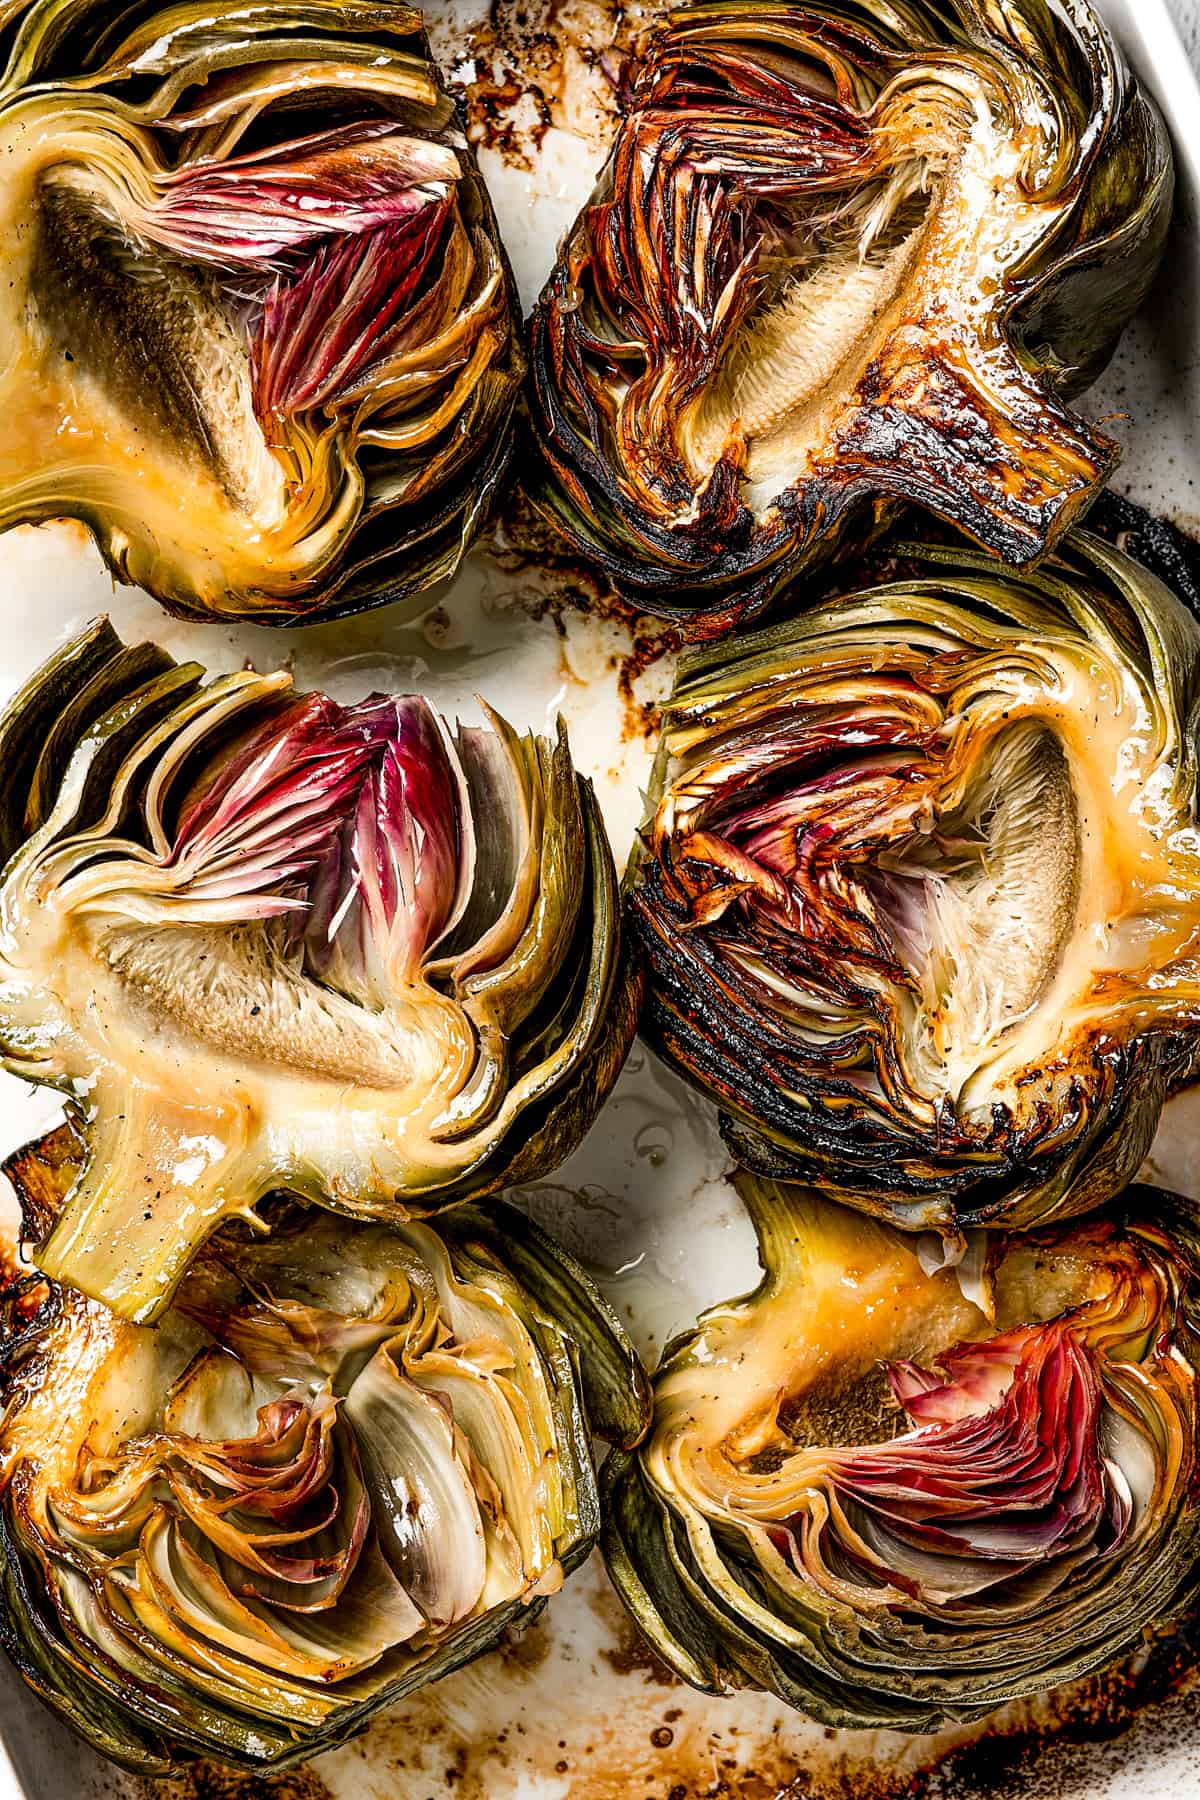 Artichokes that have been roasted and then turned cut-side up to show the texture.